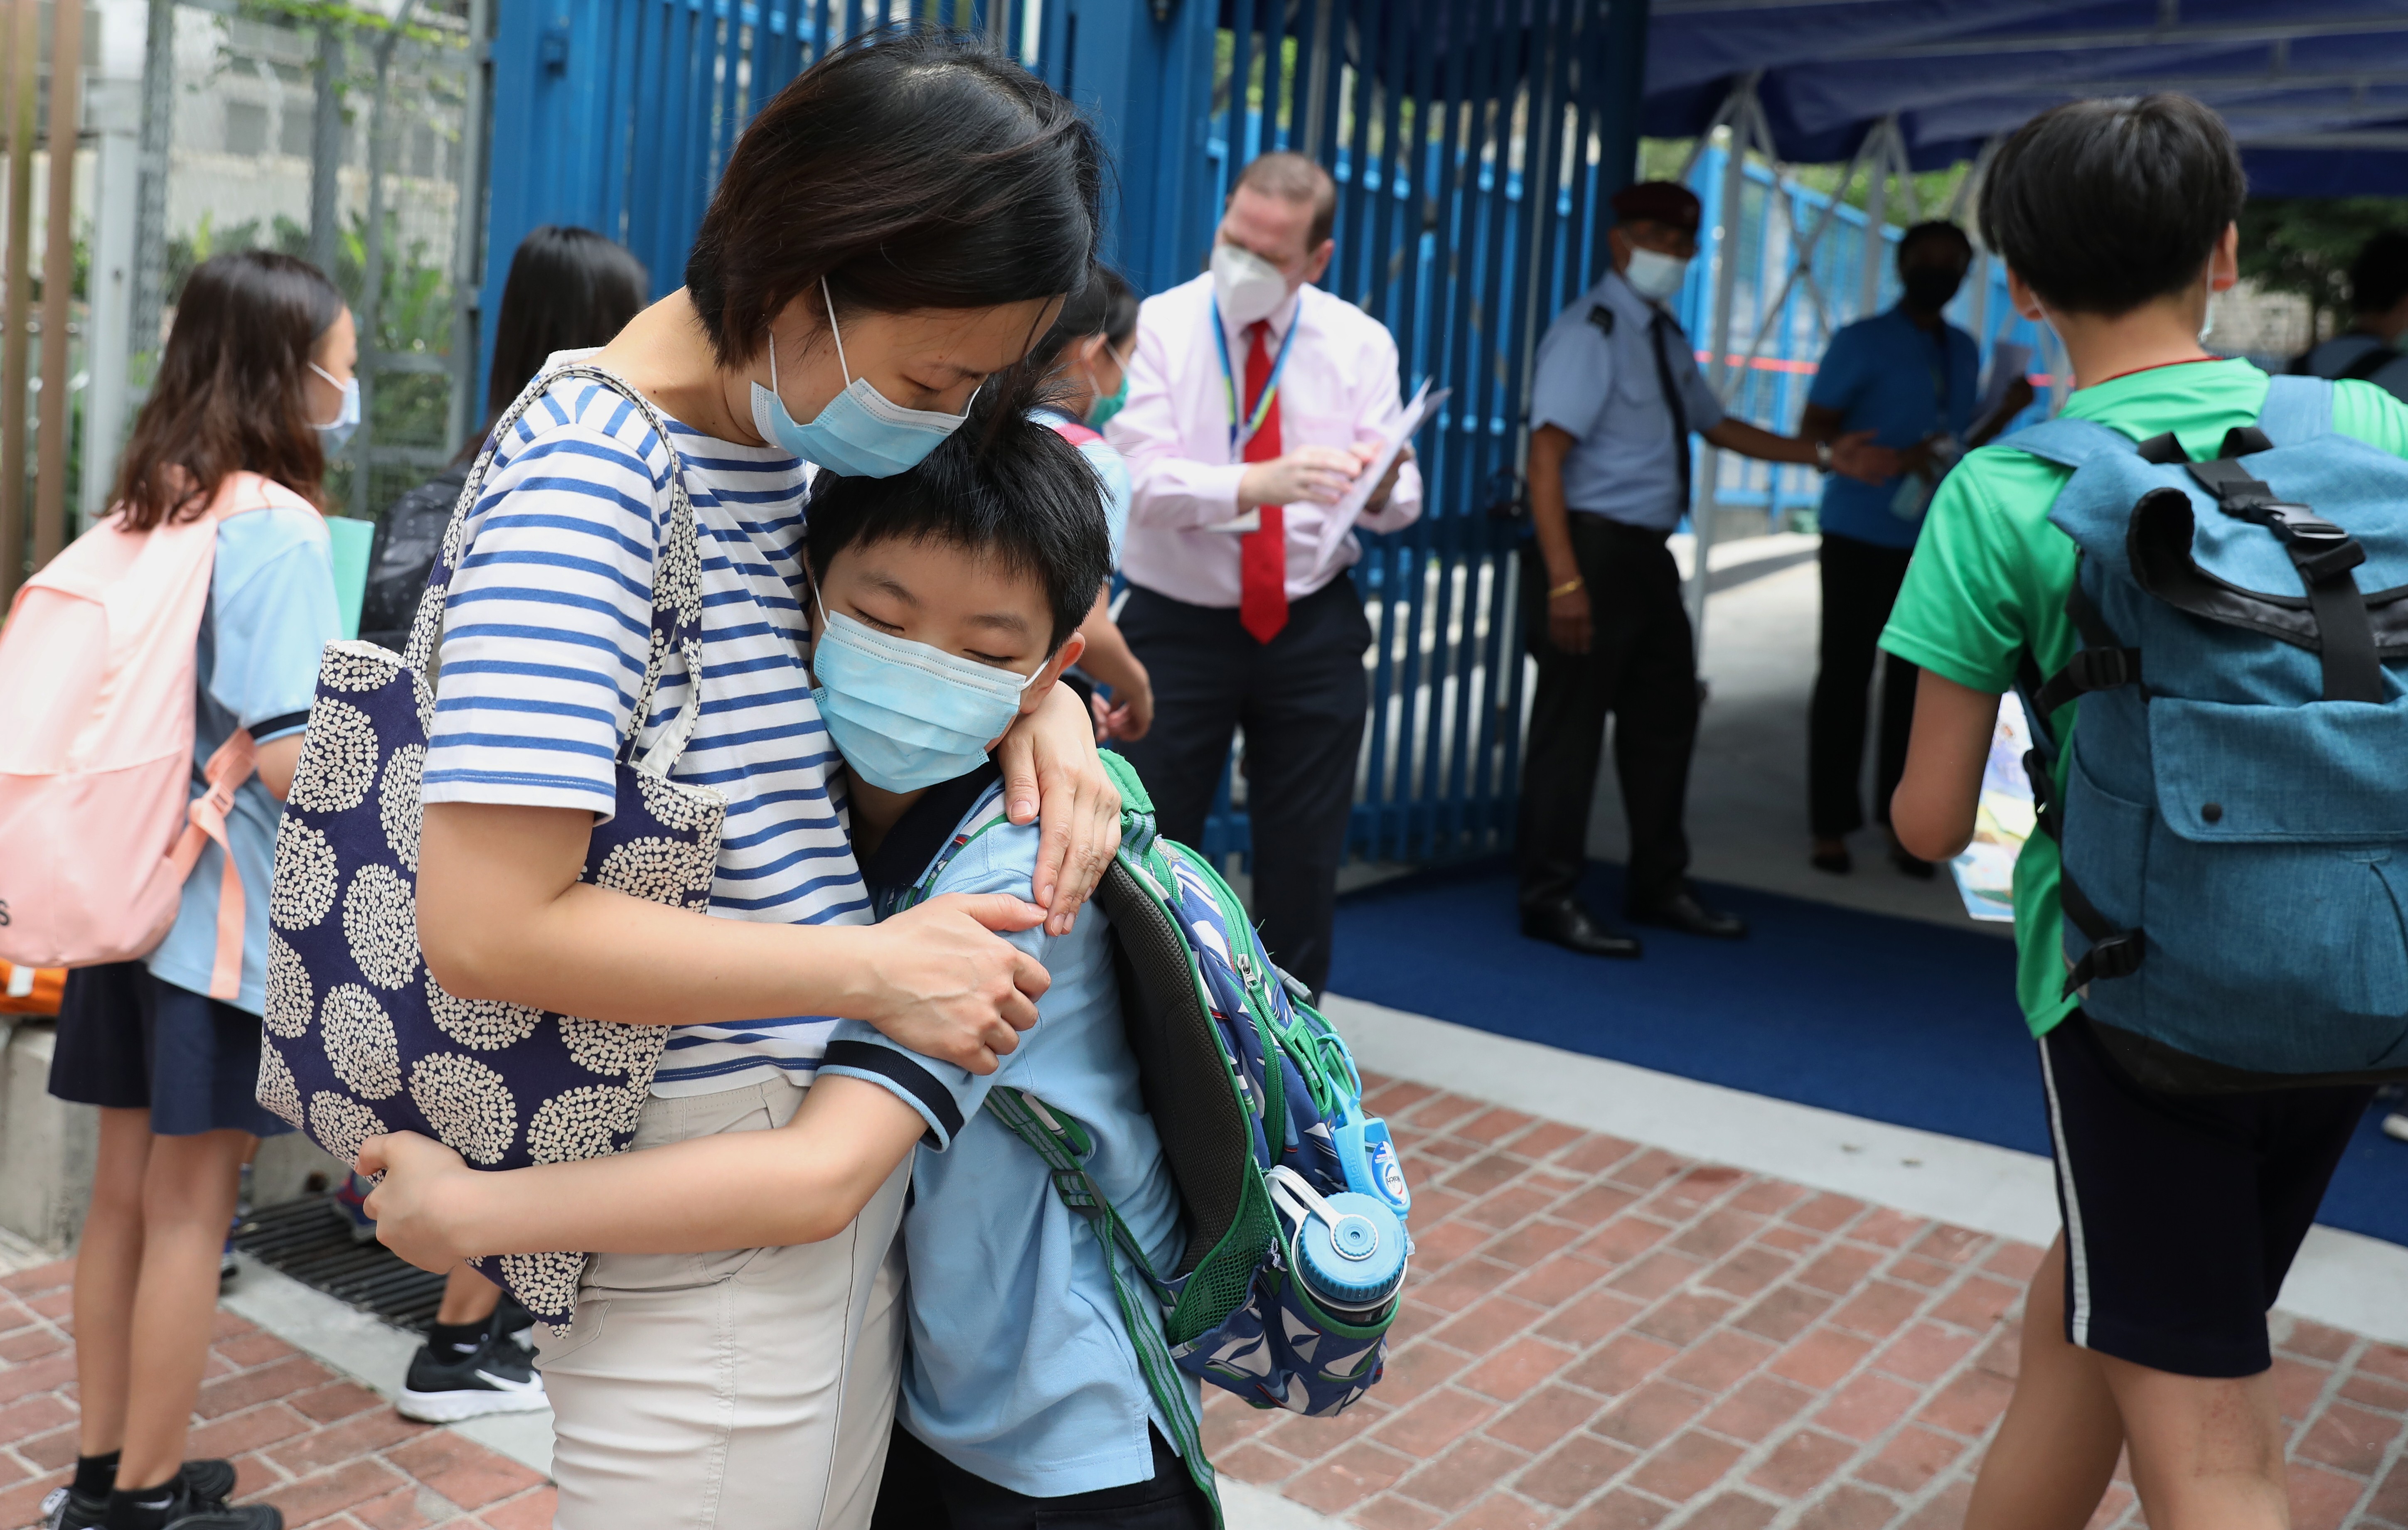 A mother hugs her son goodbye outside a school in Tai Kok Tsui on the first day back to school after coronavirus closures on May 29. Many Hong Kong parents are anxious about a suspension of face-to-face teaching once again now that the city has entered the fourth wave of Covid-19. Photo: Nora Tam